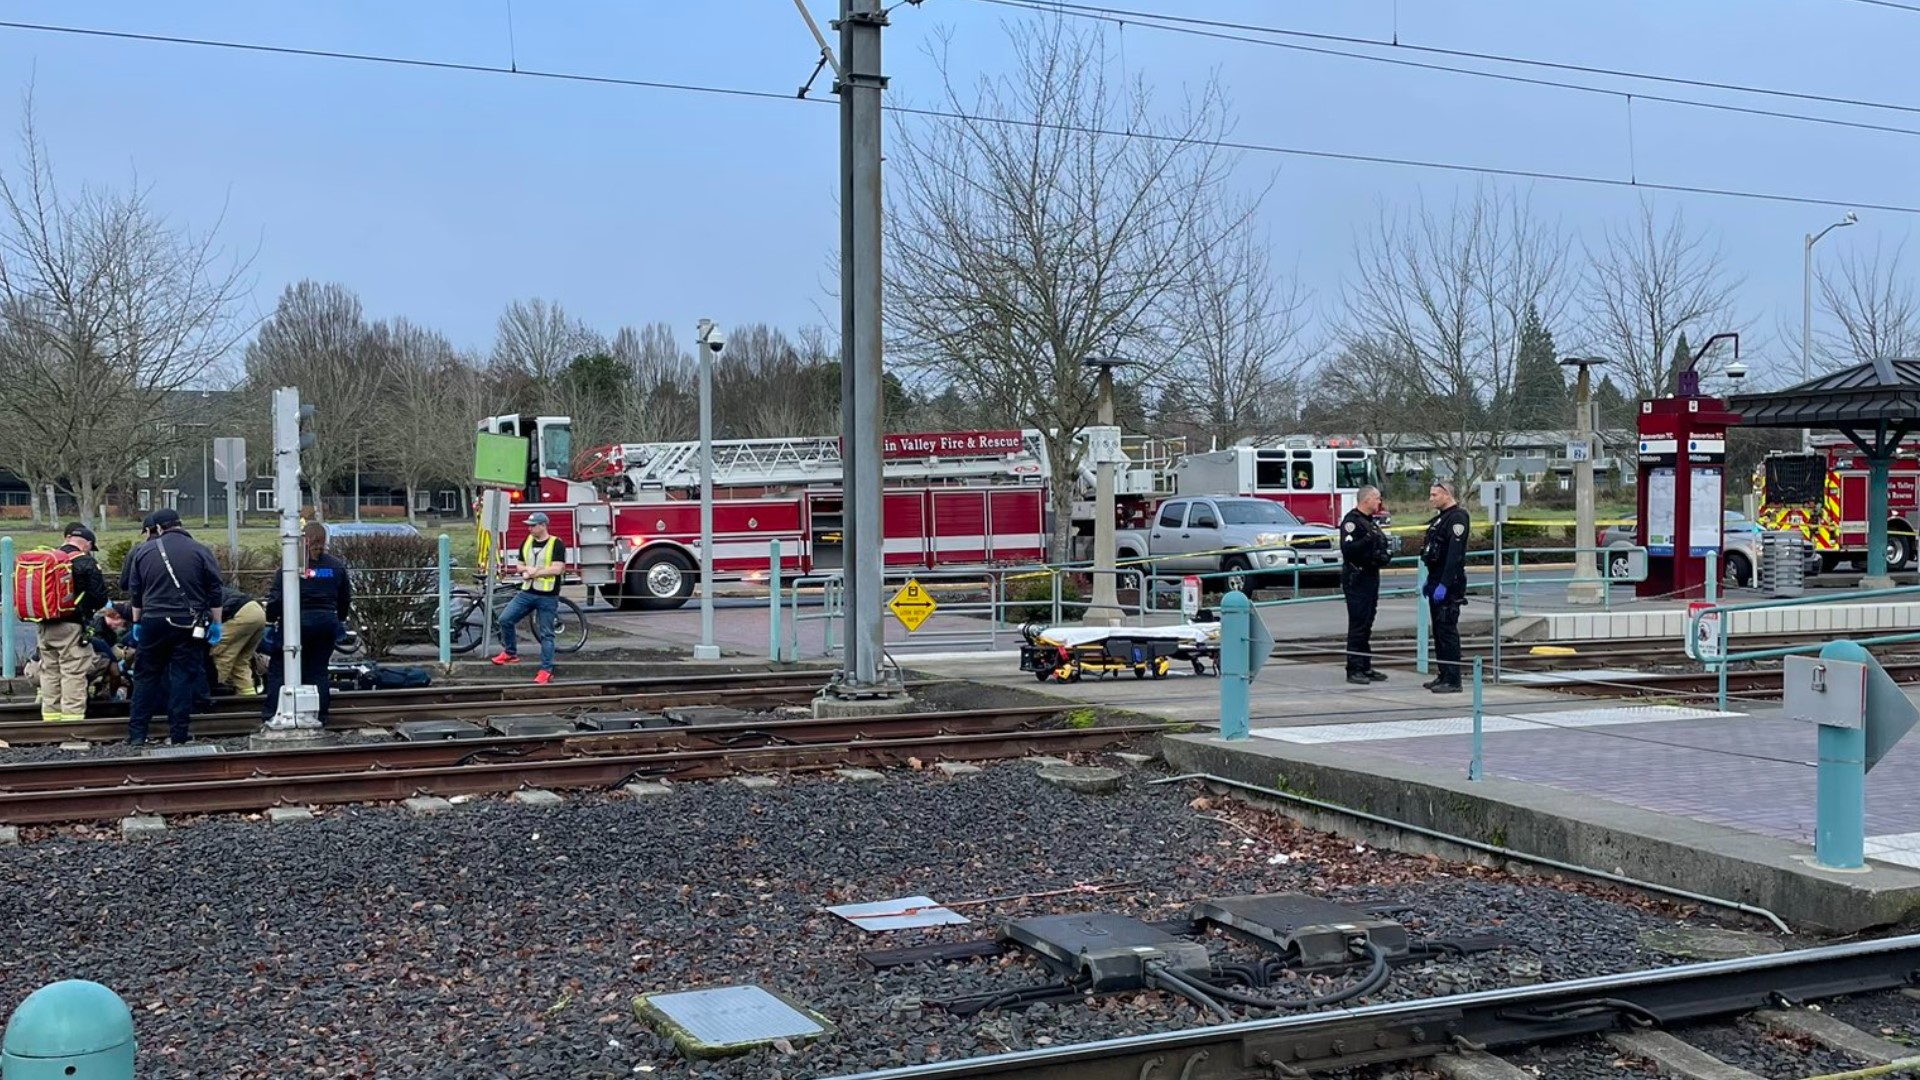 The man had just exited a MAX train at the Beaverton Transit Center. He was taken to a local trauma center in serious condition, according to emergency officials.